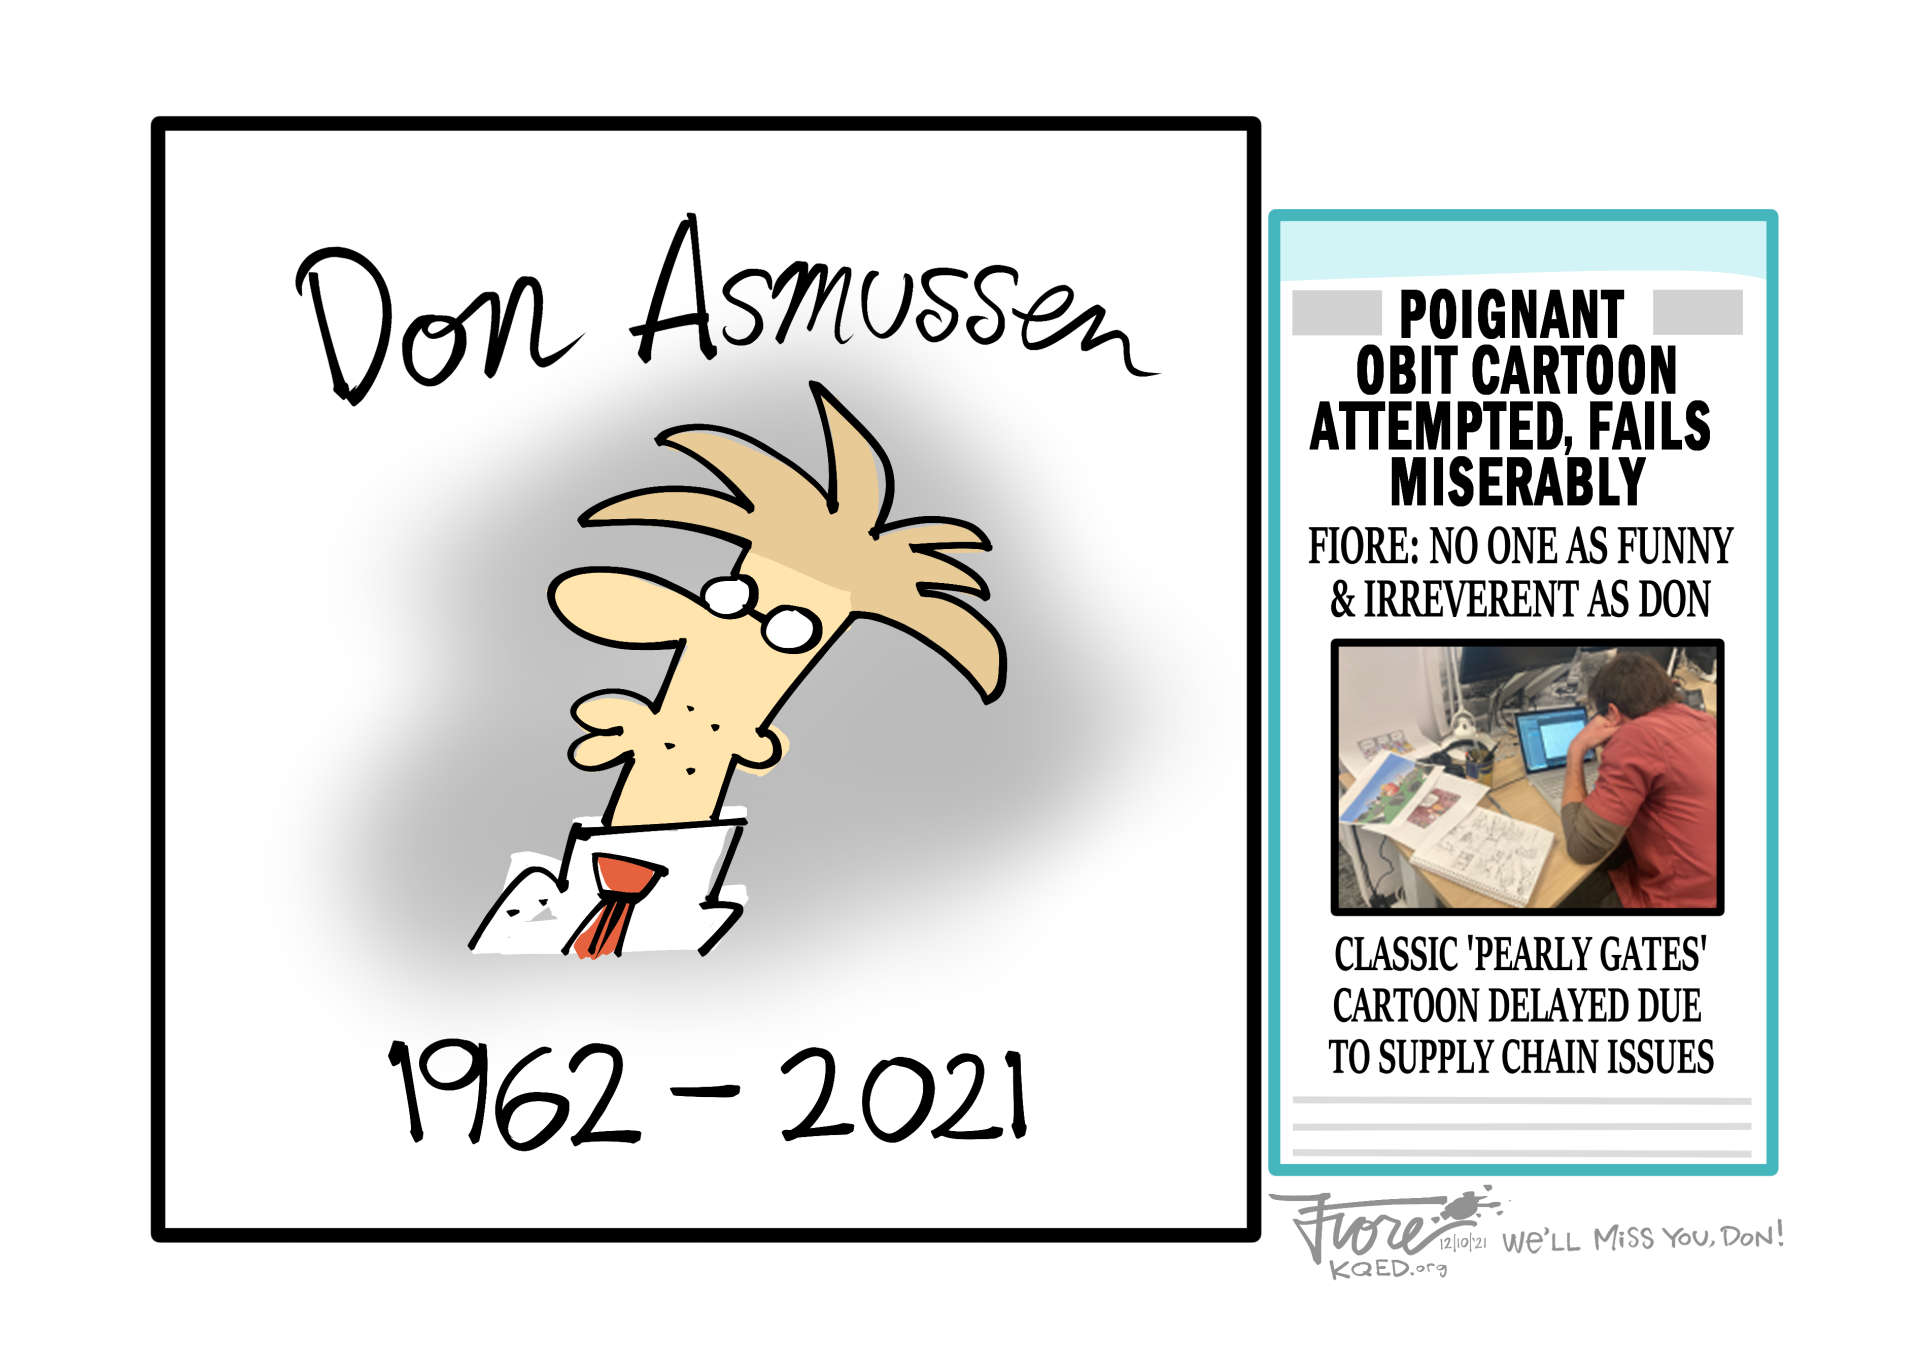 We'll Miss You, Don Asmussen | KQED